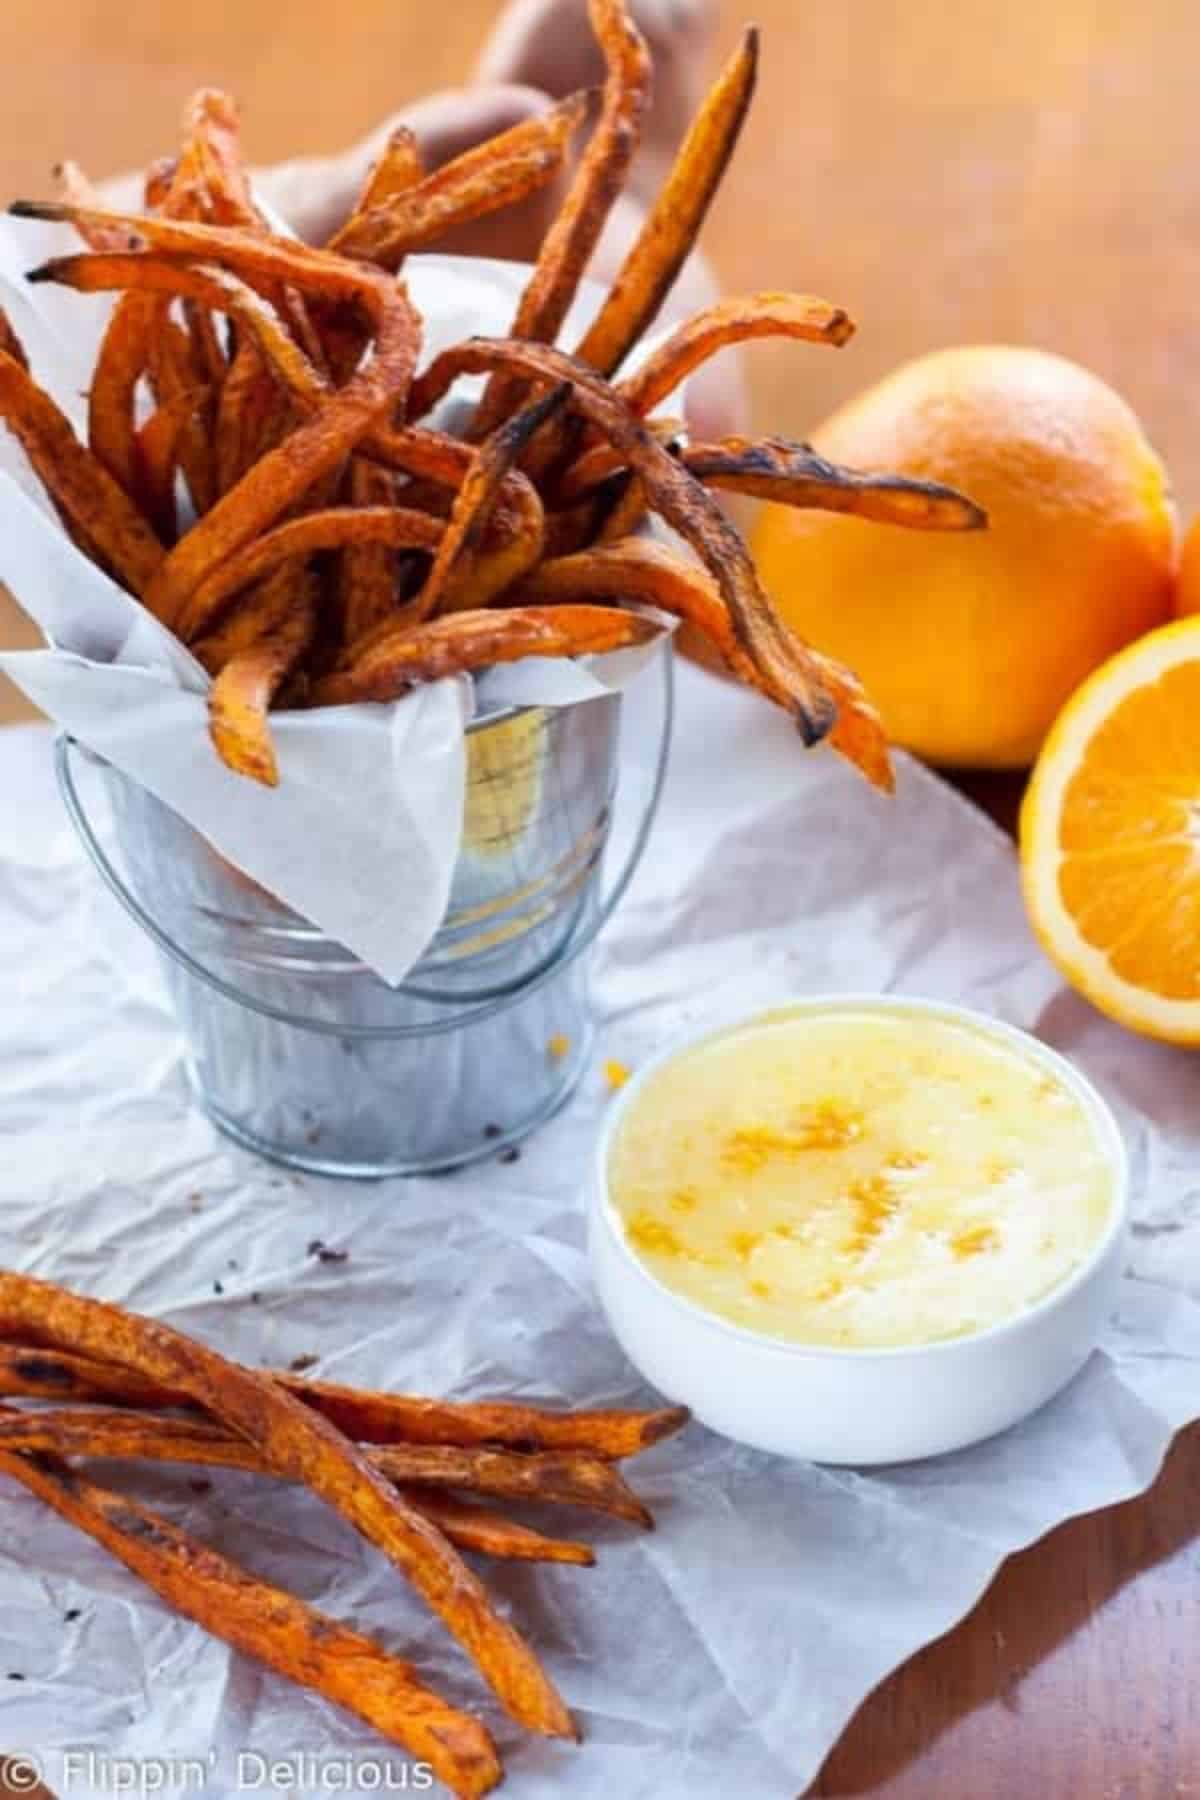 Crispy Baked Sweet Potato Fries with Orange Zest Icing in a small metal bucket on a table.